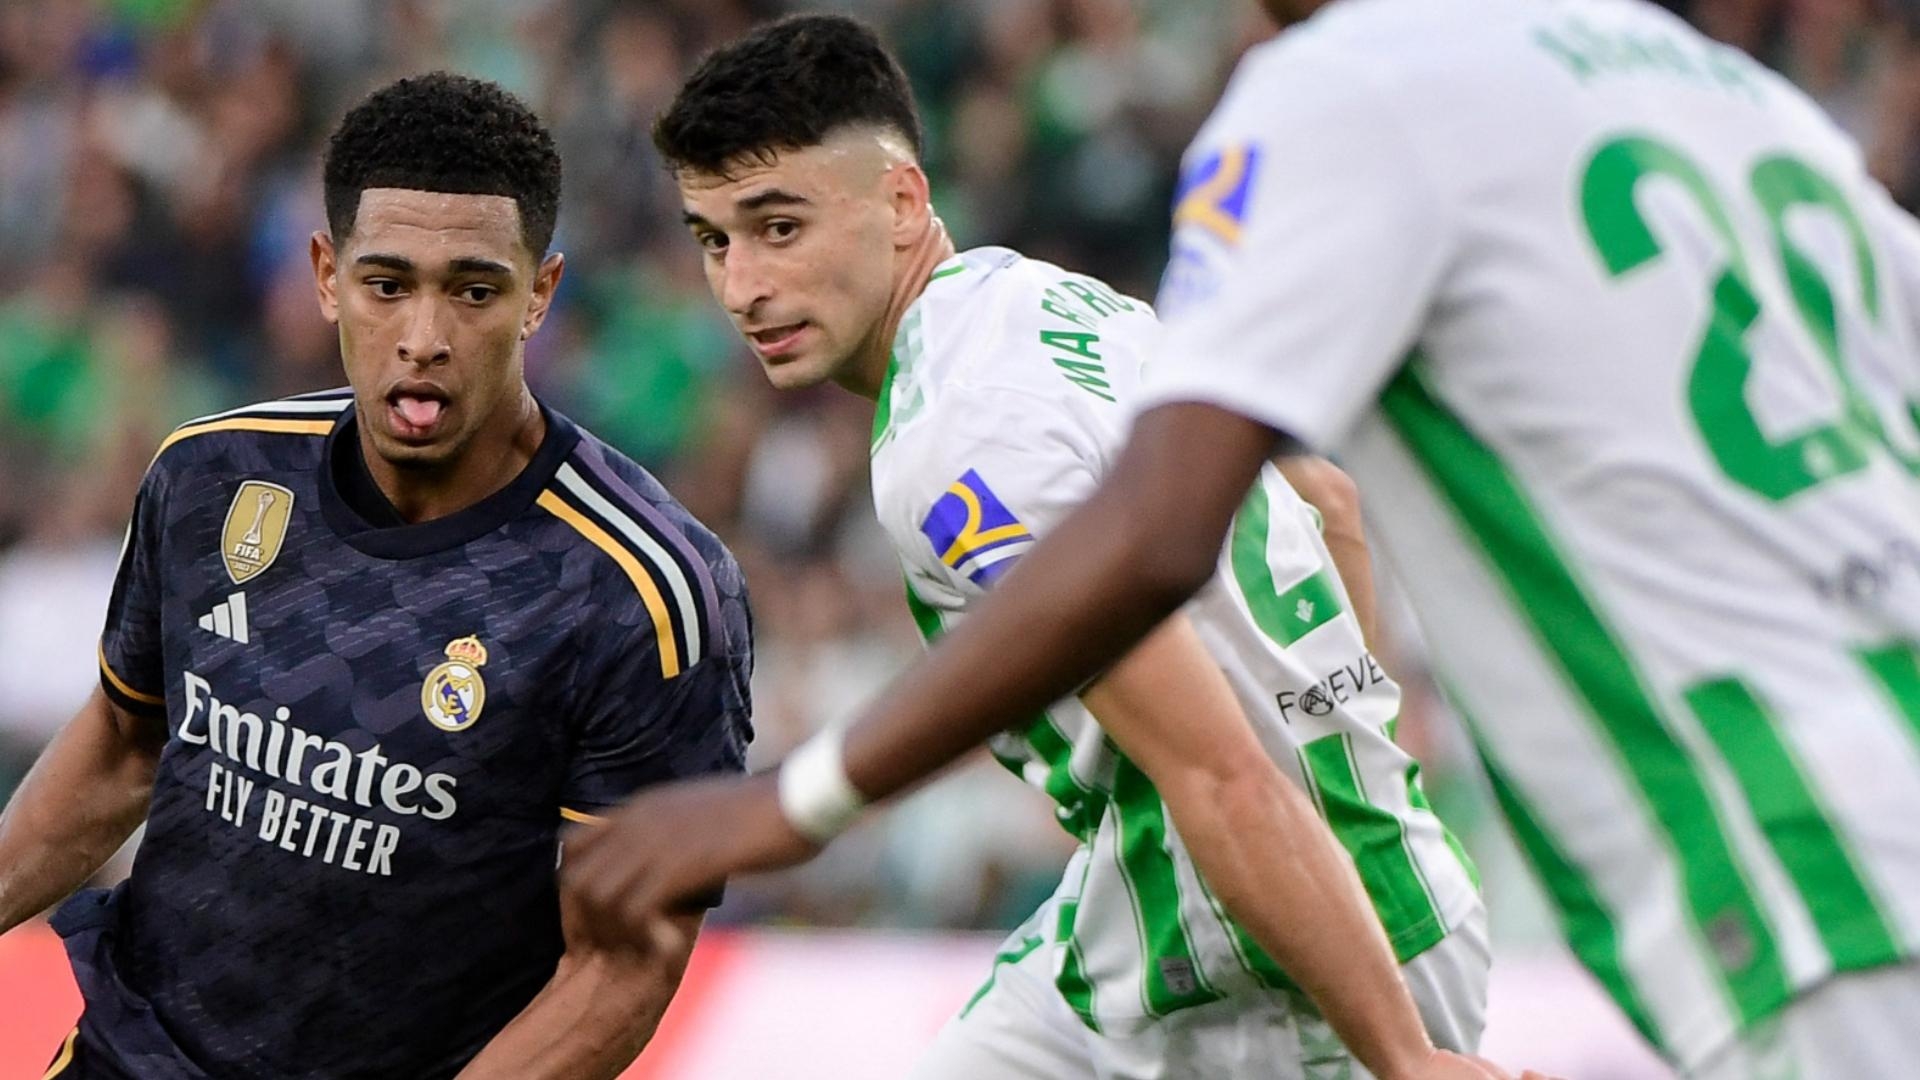 Bellingham scores again as Real Madrid held to draw at Betis